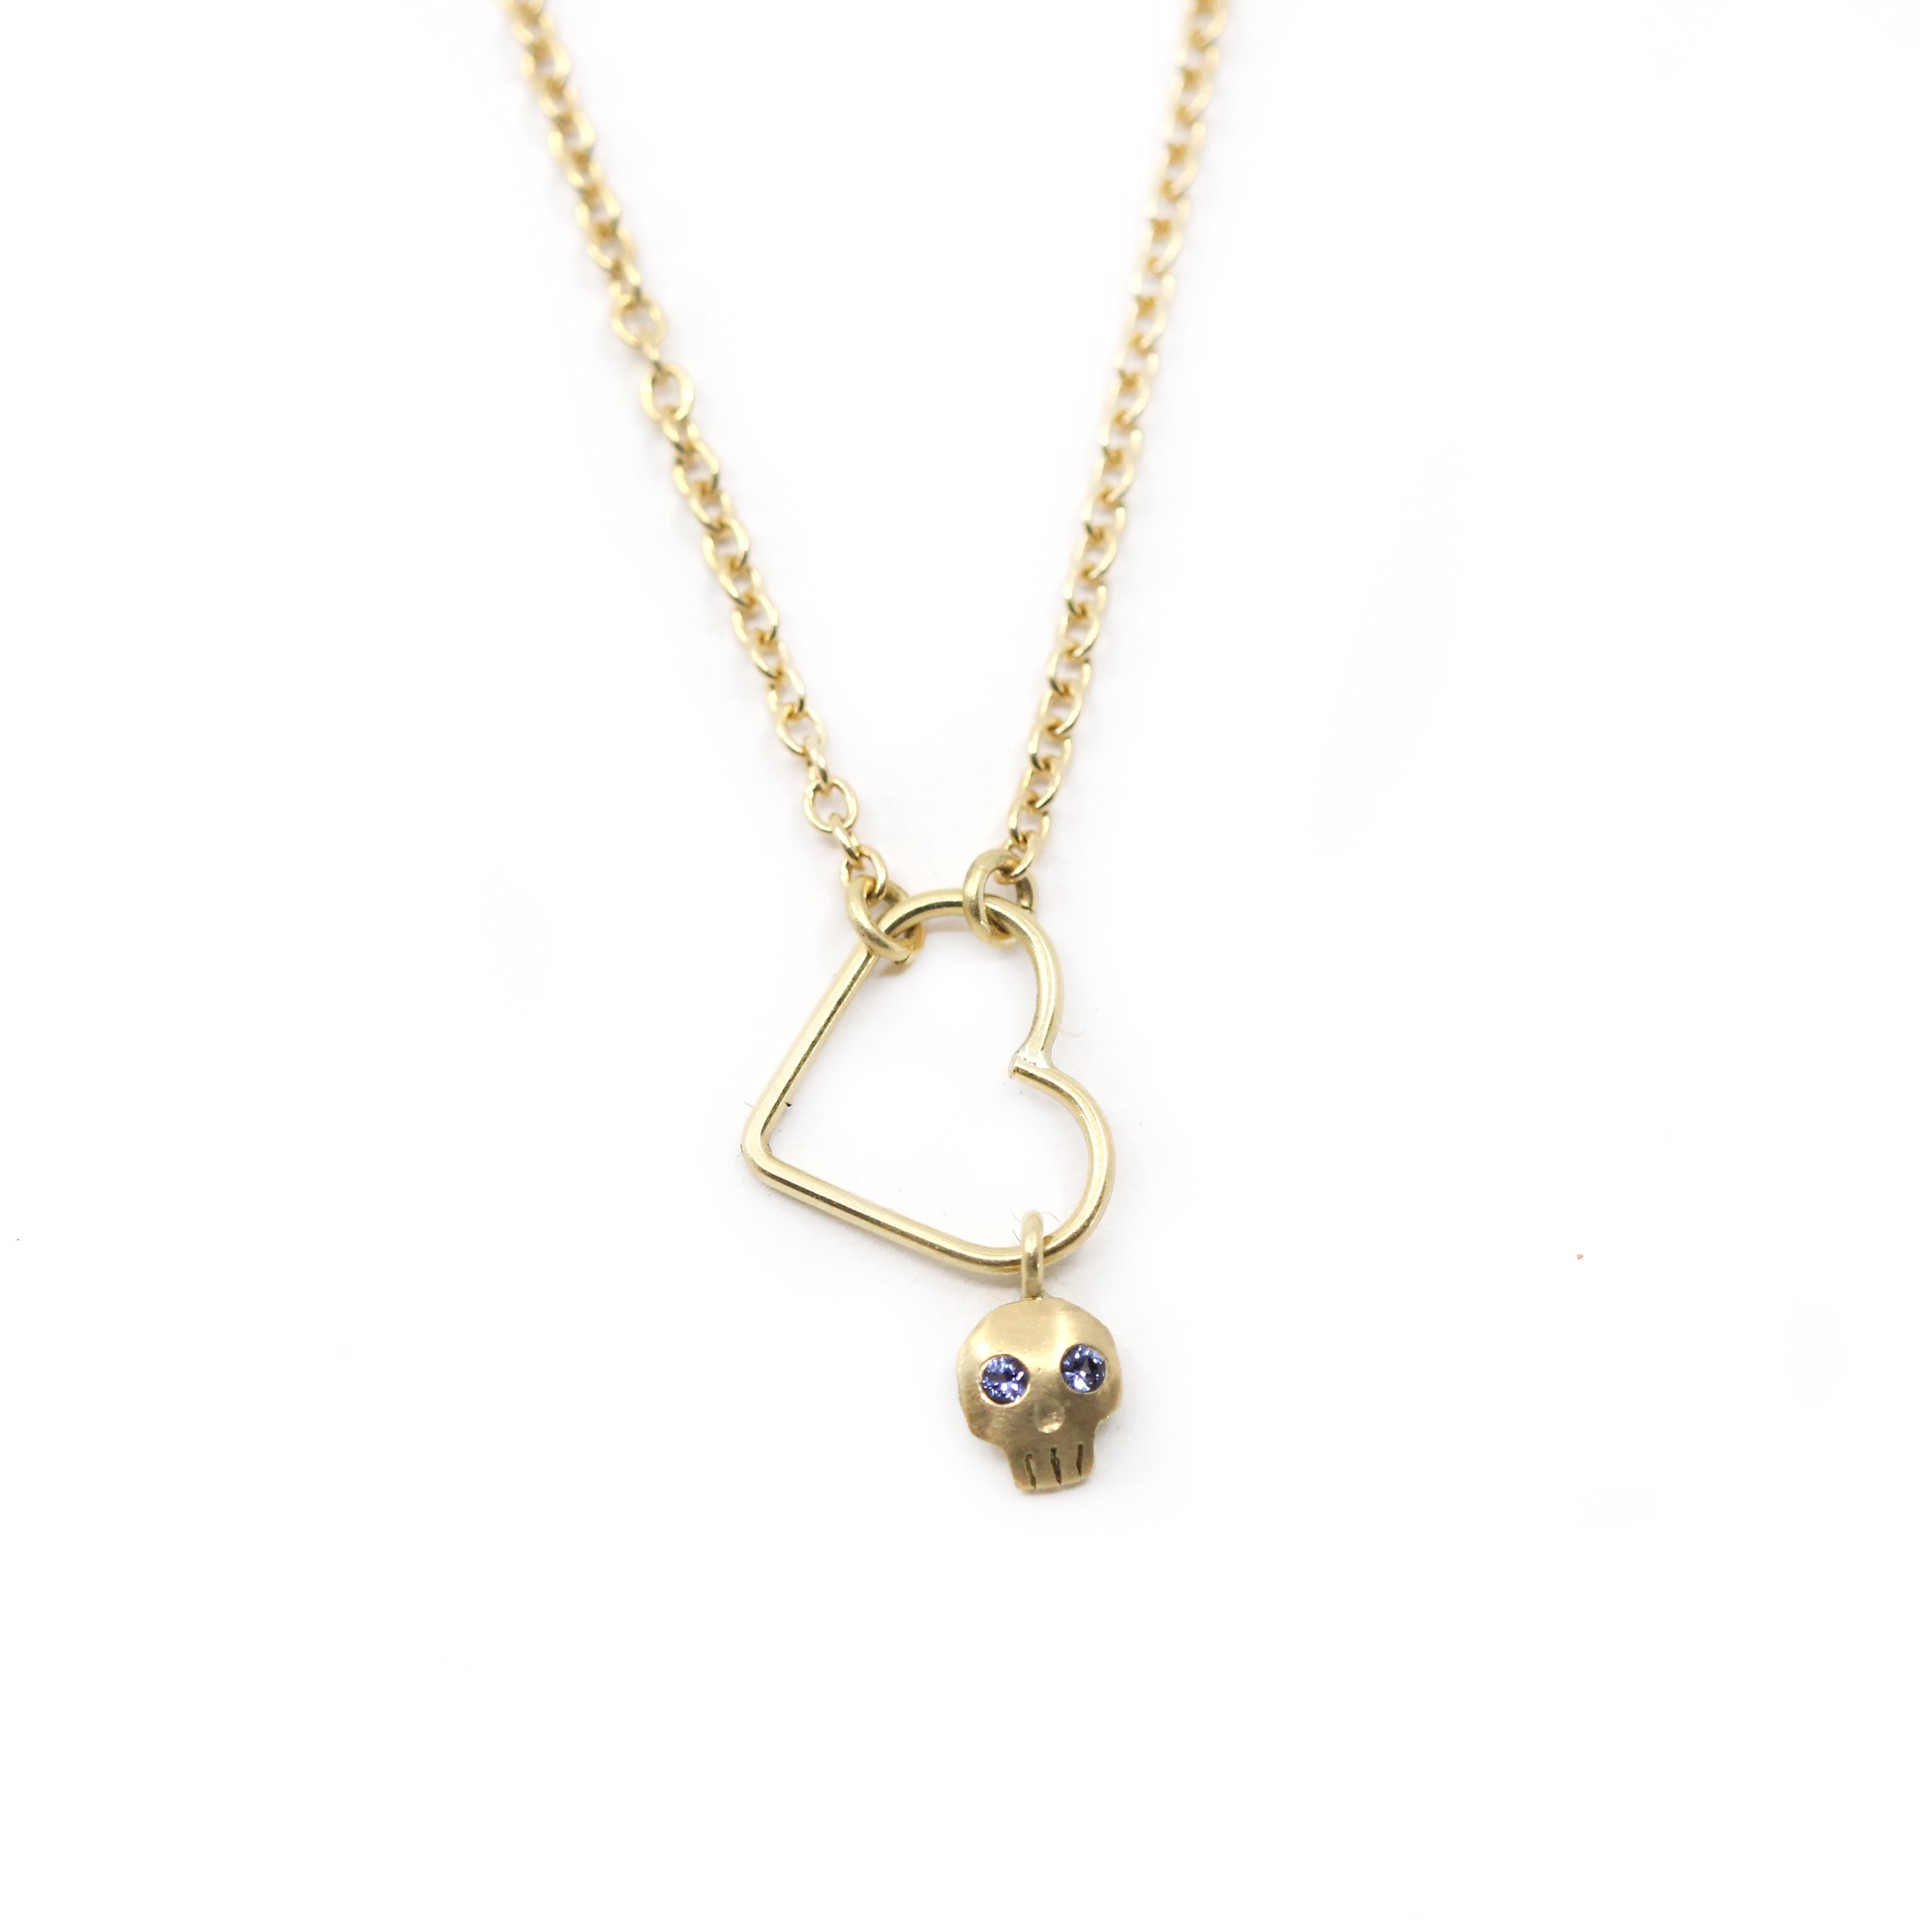 Single Skull / Heart Necklace by Susan Elnora